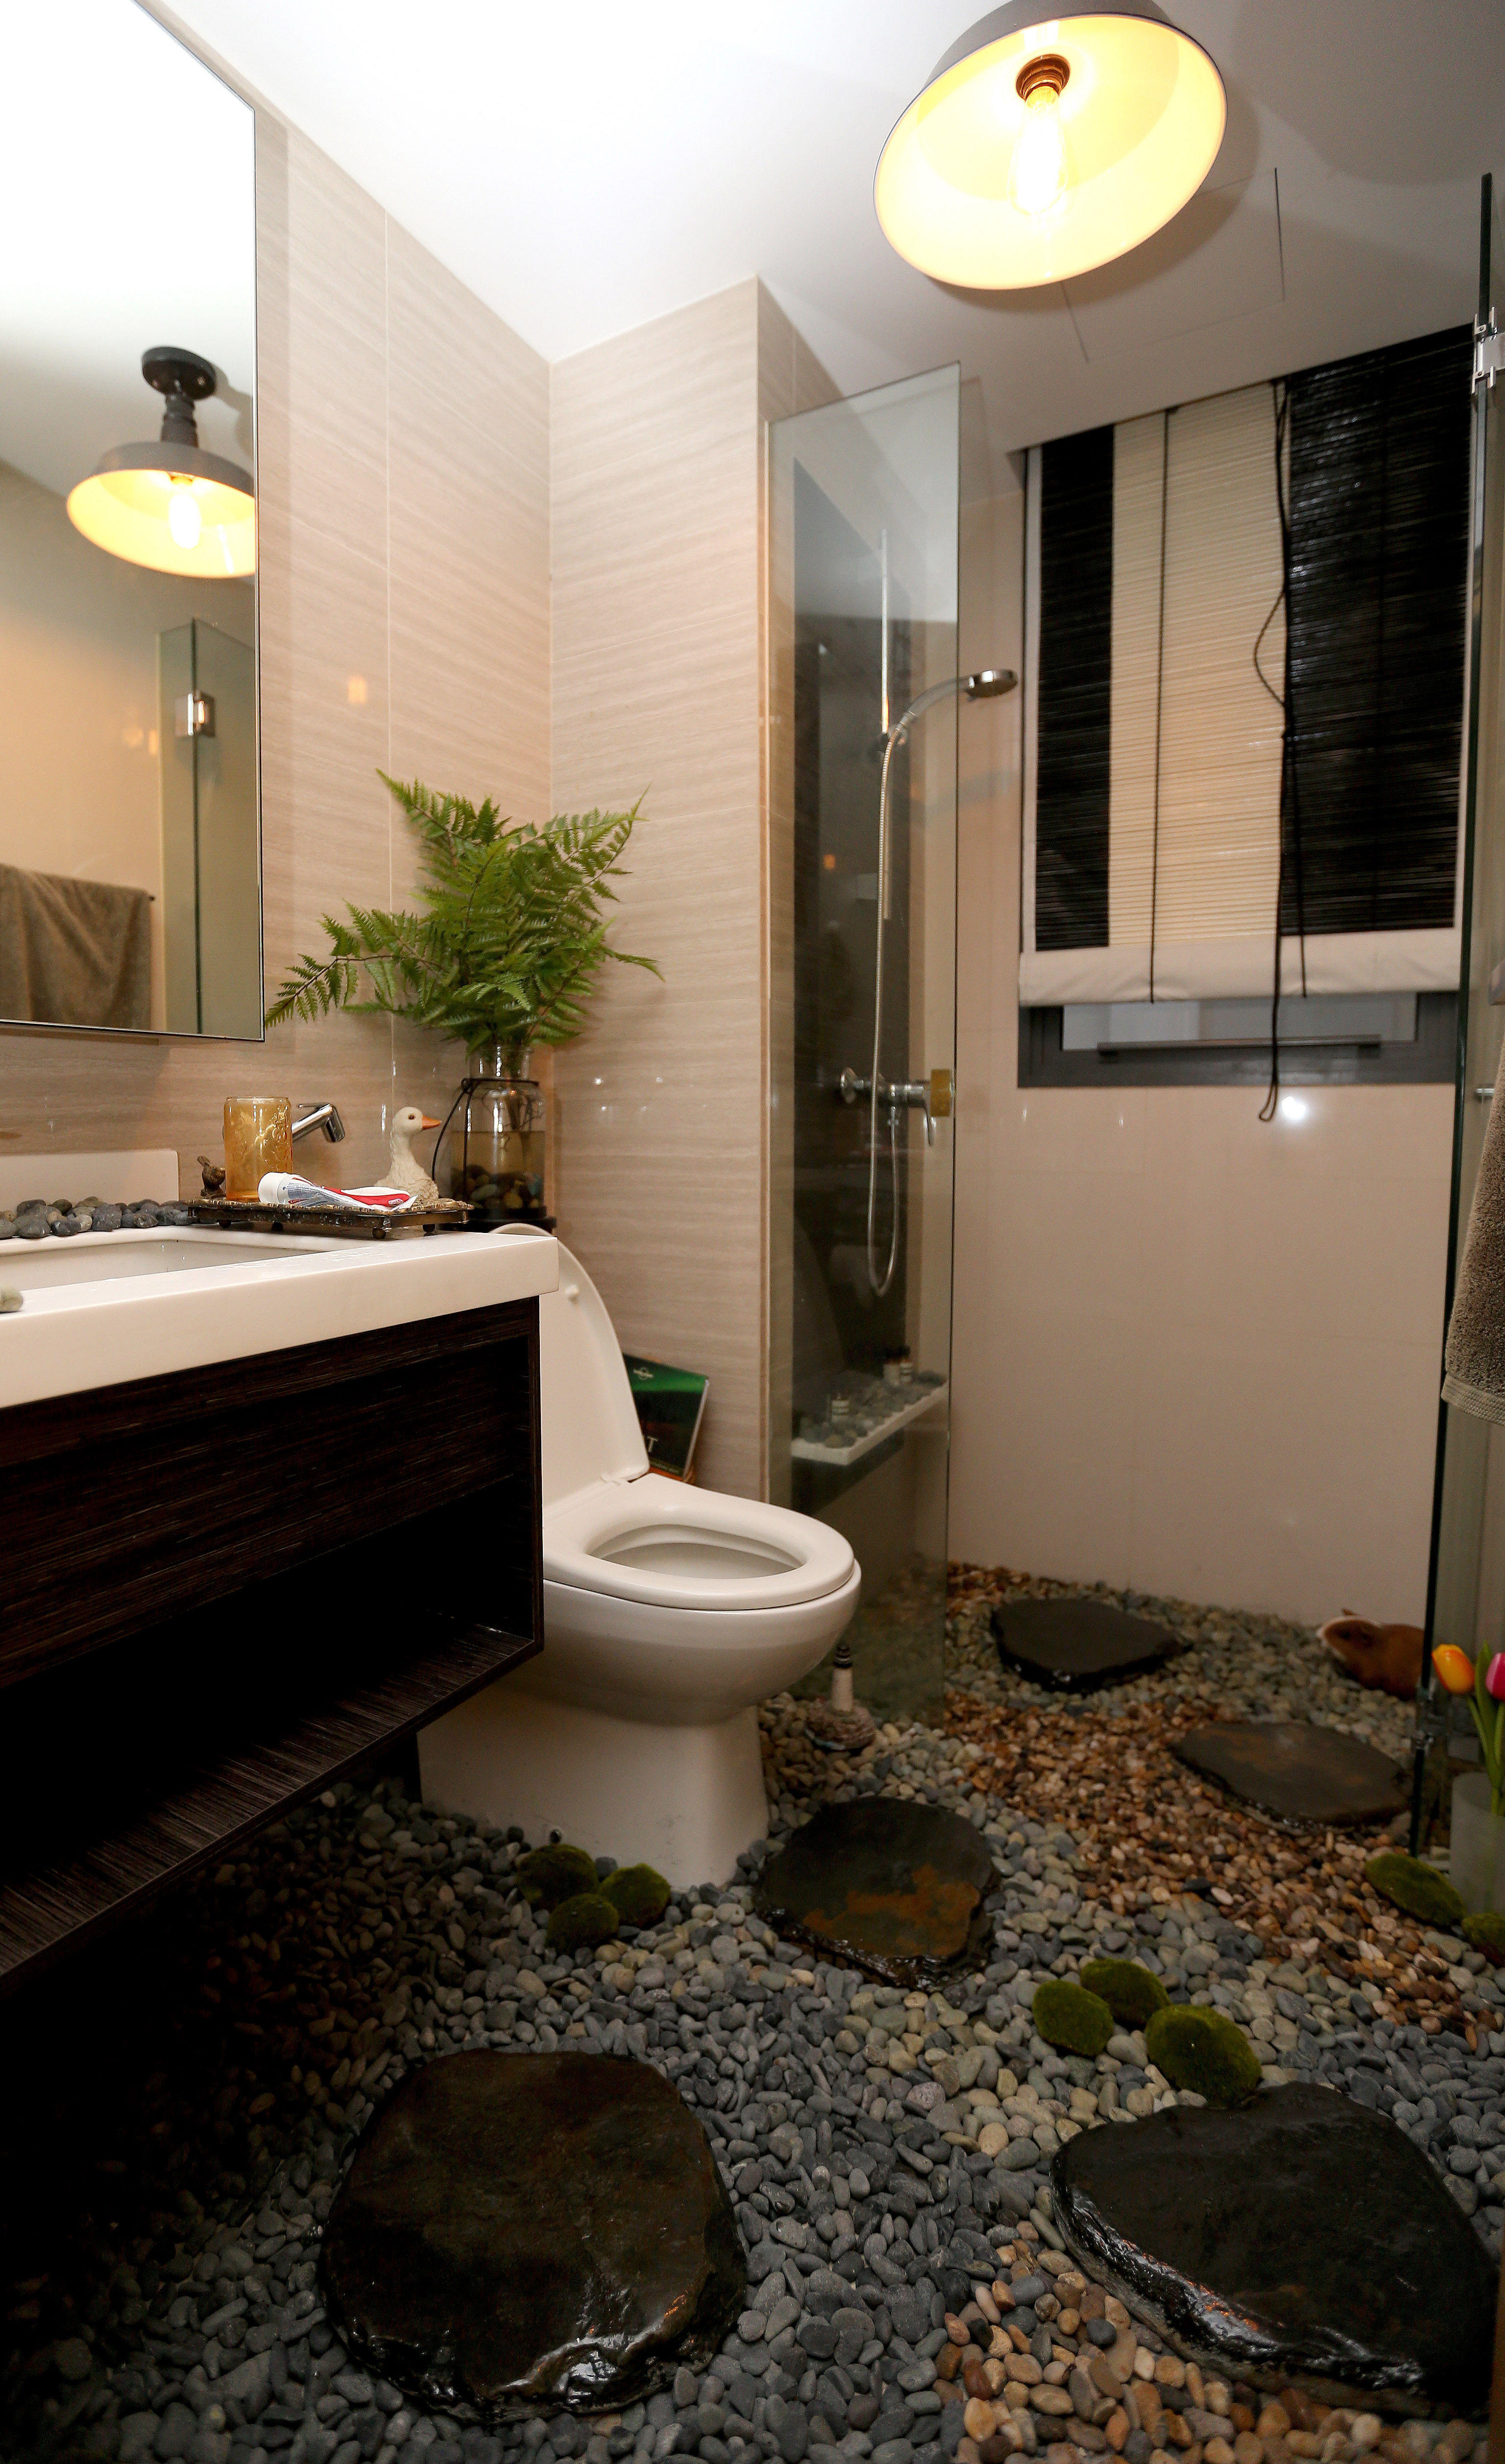 Loose gravel and stepping stones add to the tropical colonial interior design of the guest bathroom (above).  